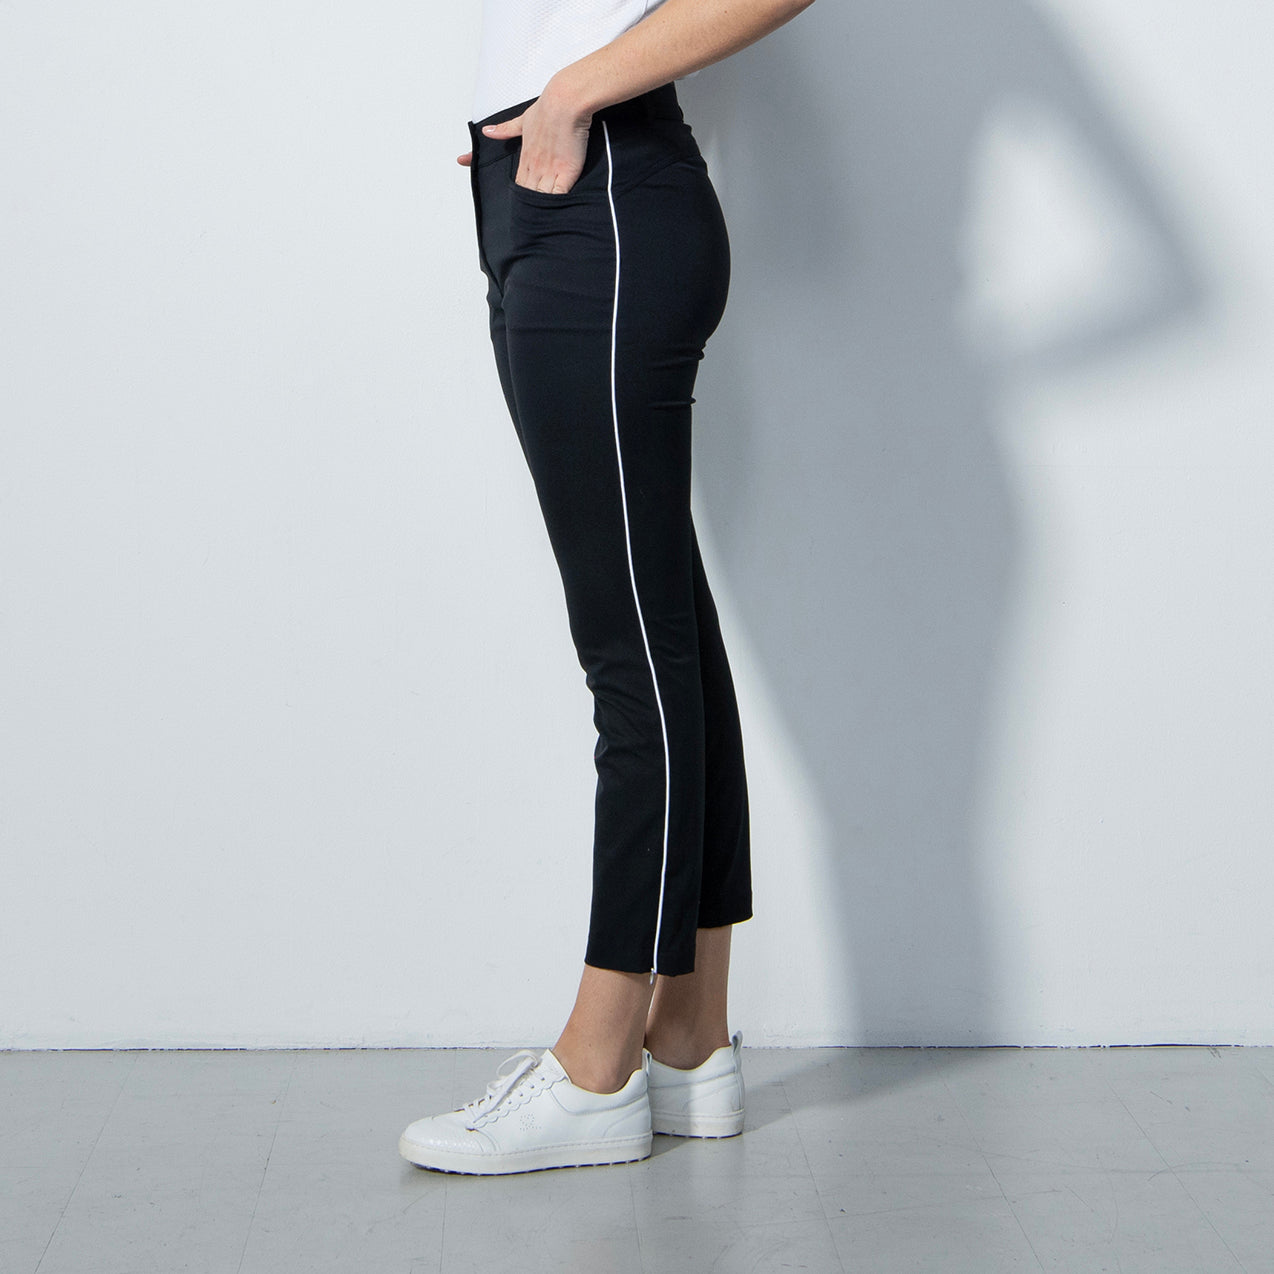 Dekuba Women's sports trousers with cuffs: for sale at 15.99€ on  Mecshopping.it